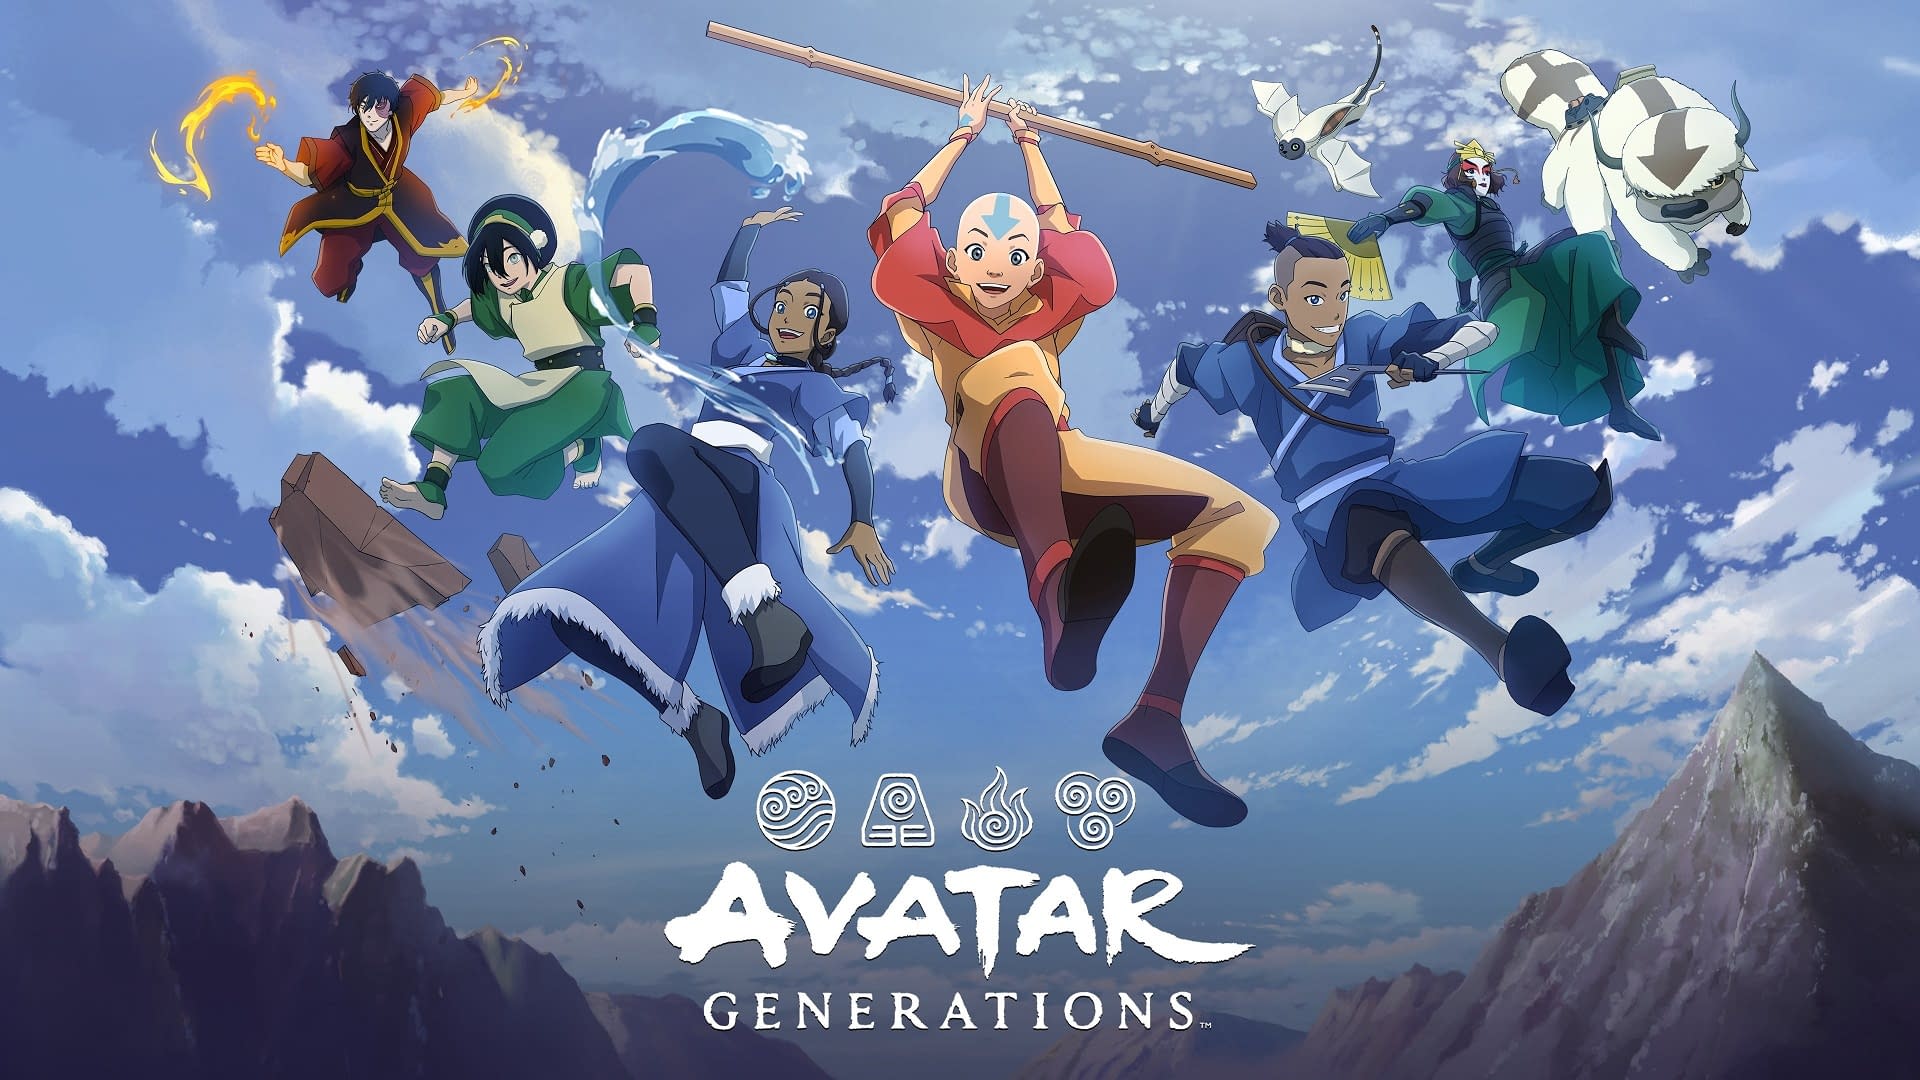 Play Fragman for Mobile Game Avatar Generations Published